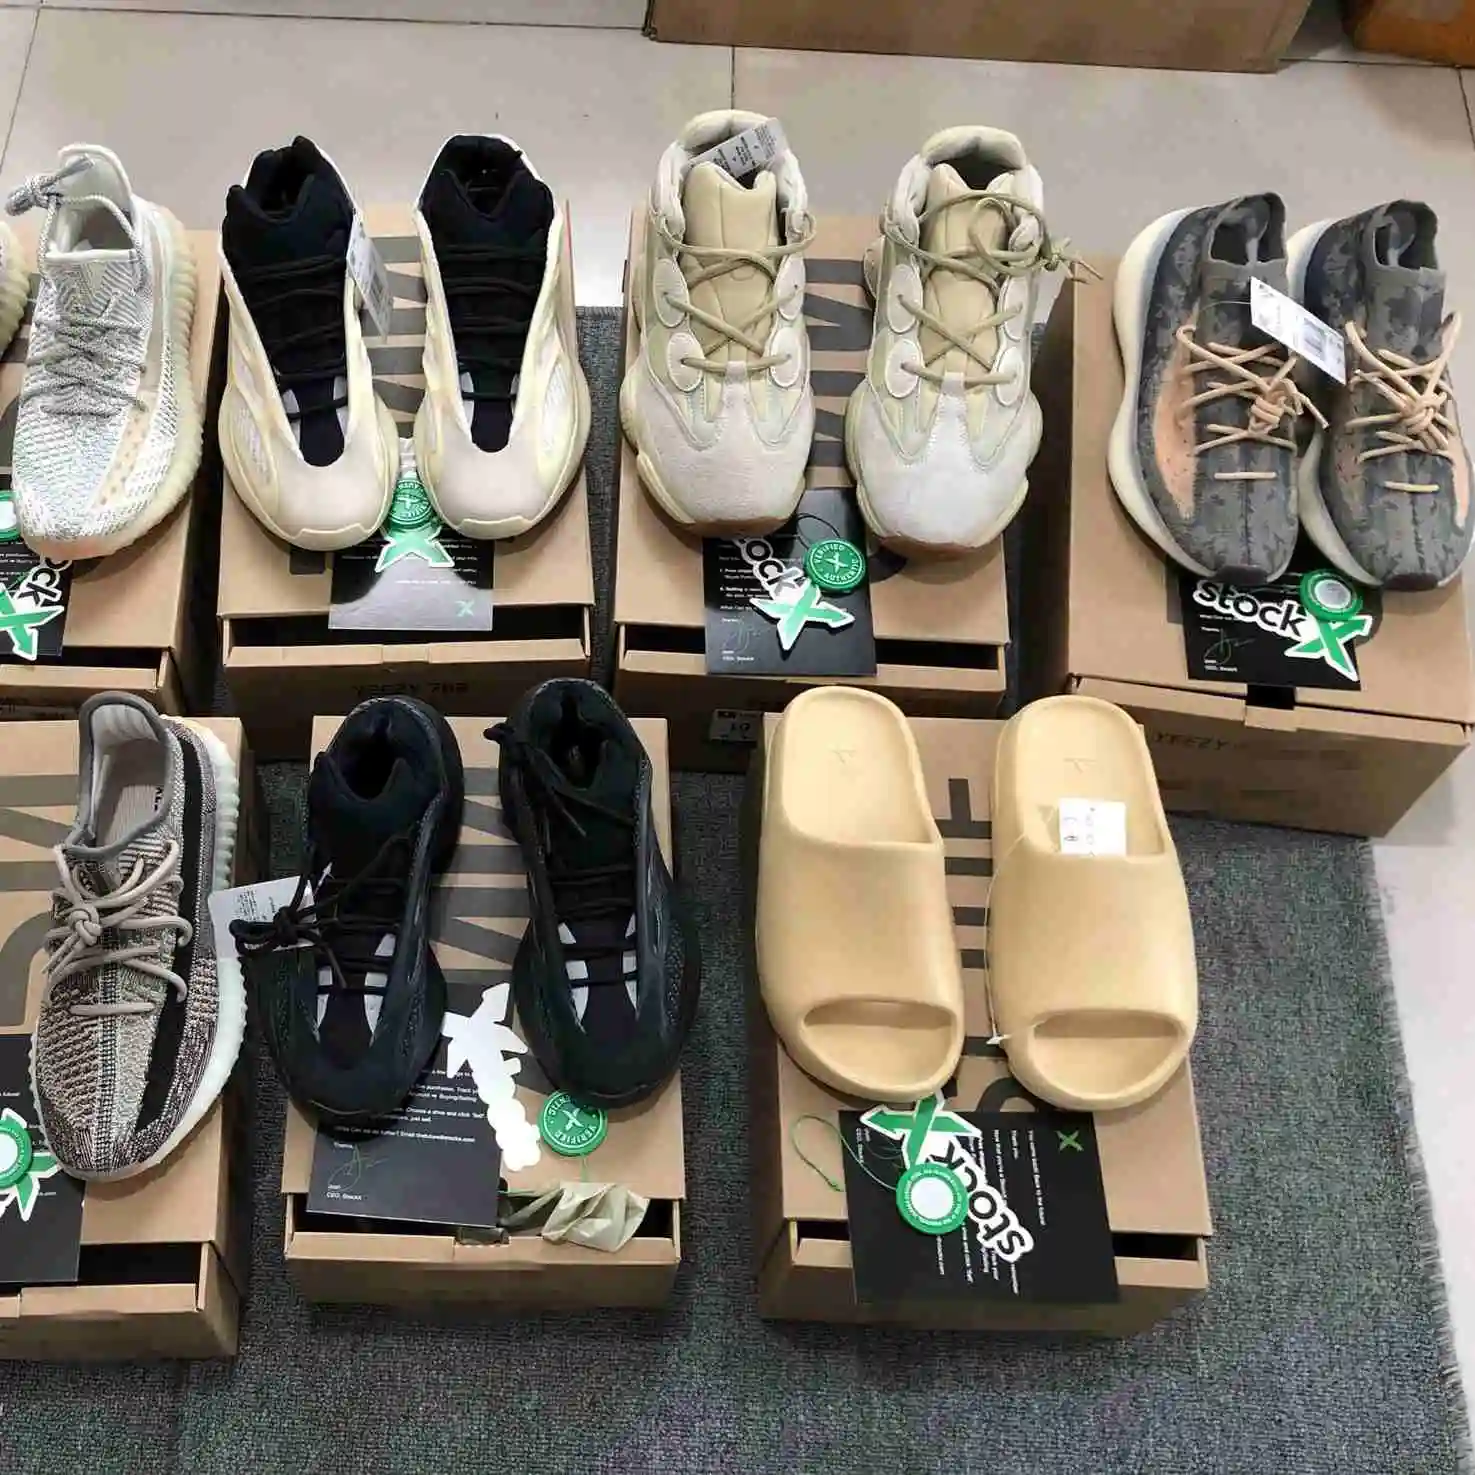 

Stock X yupoo OG brand Original 1:1 Yeezy 350 380 700 slippers V2 v3 sport shoes and sneakers trainers